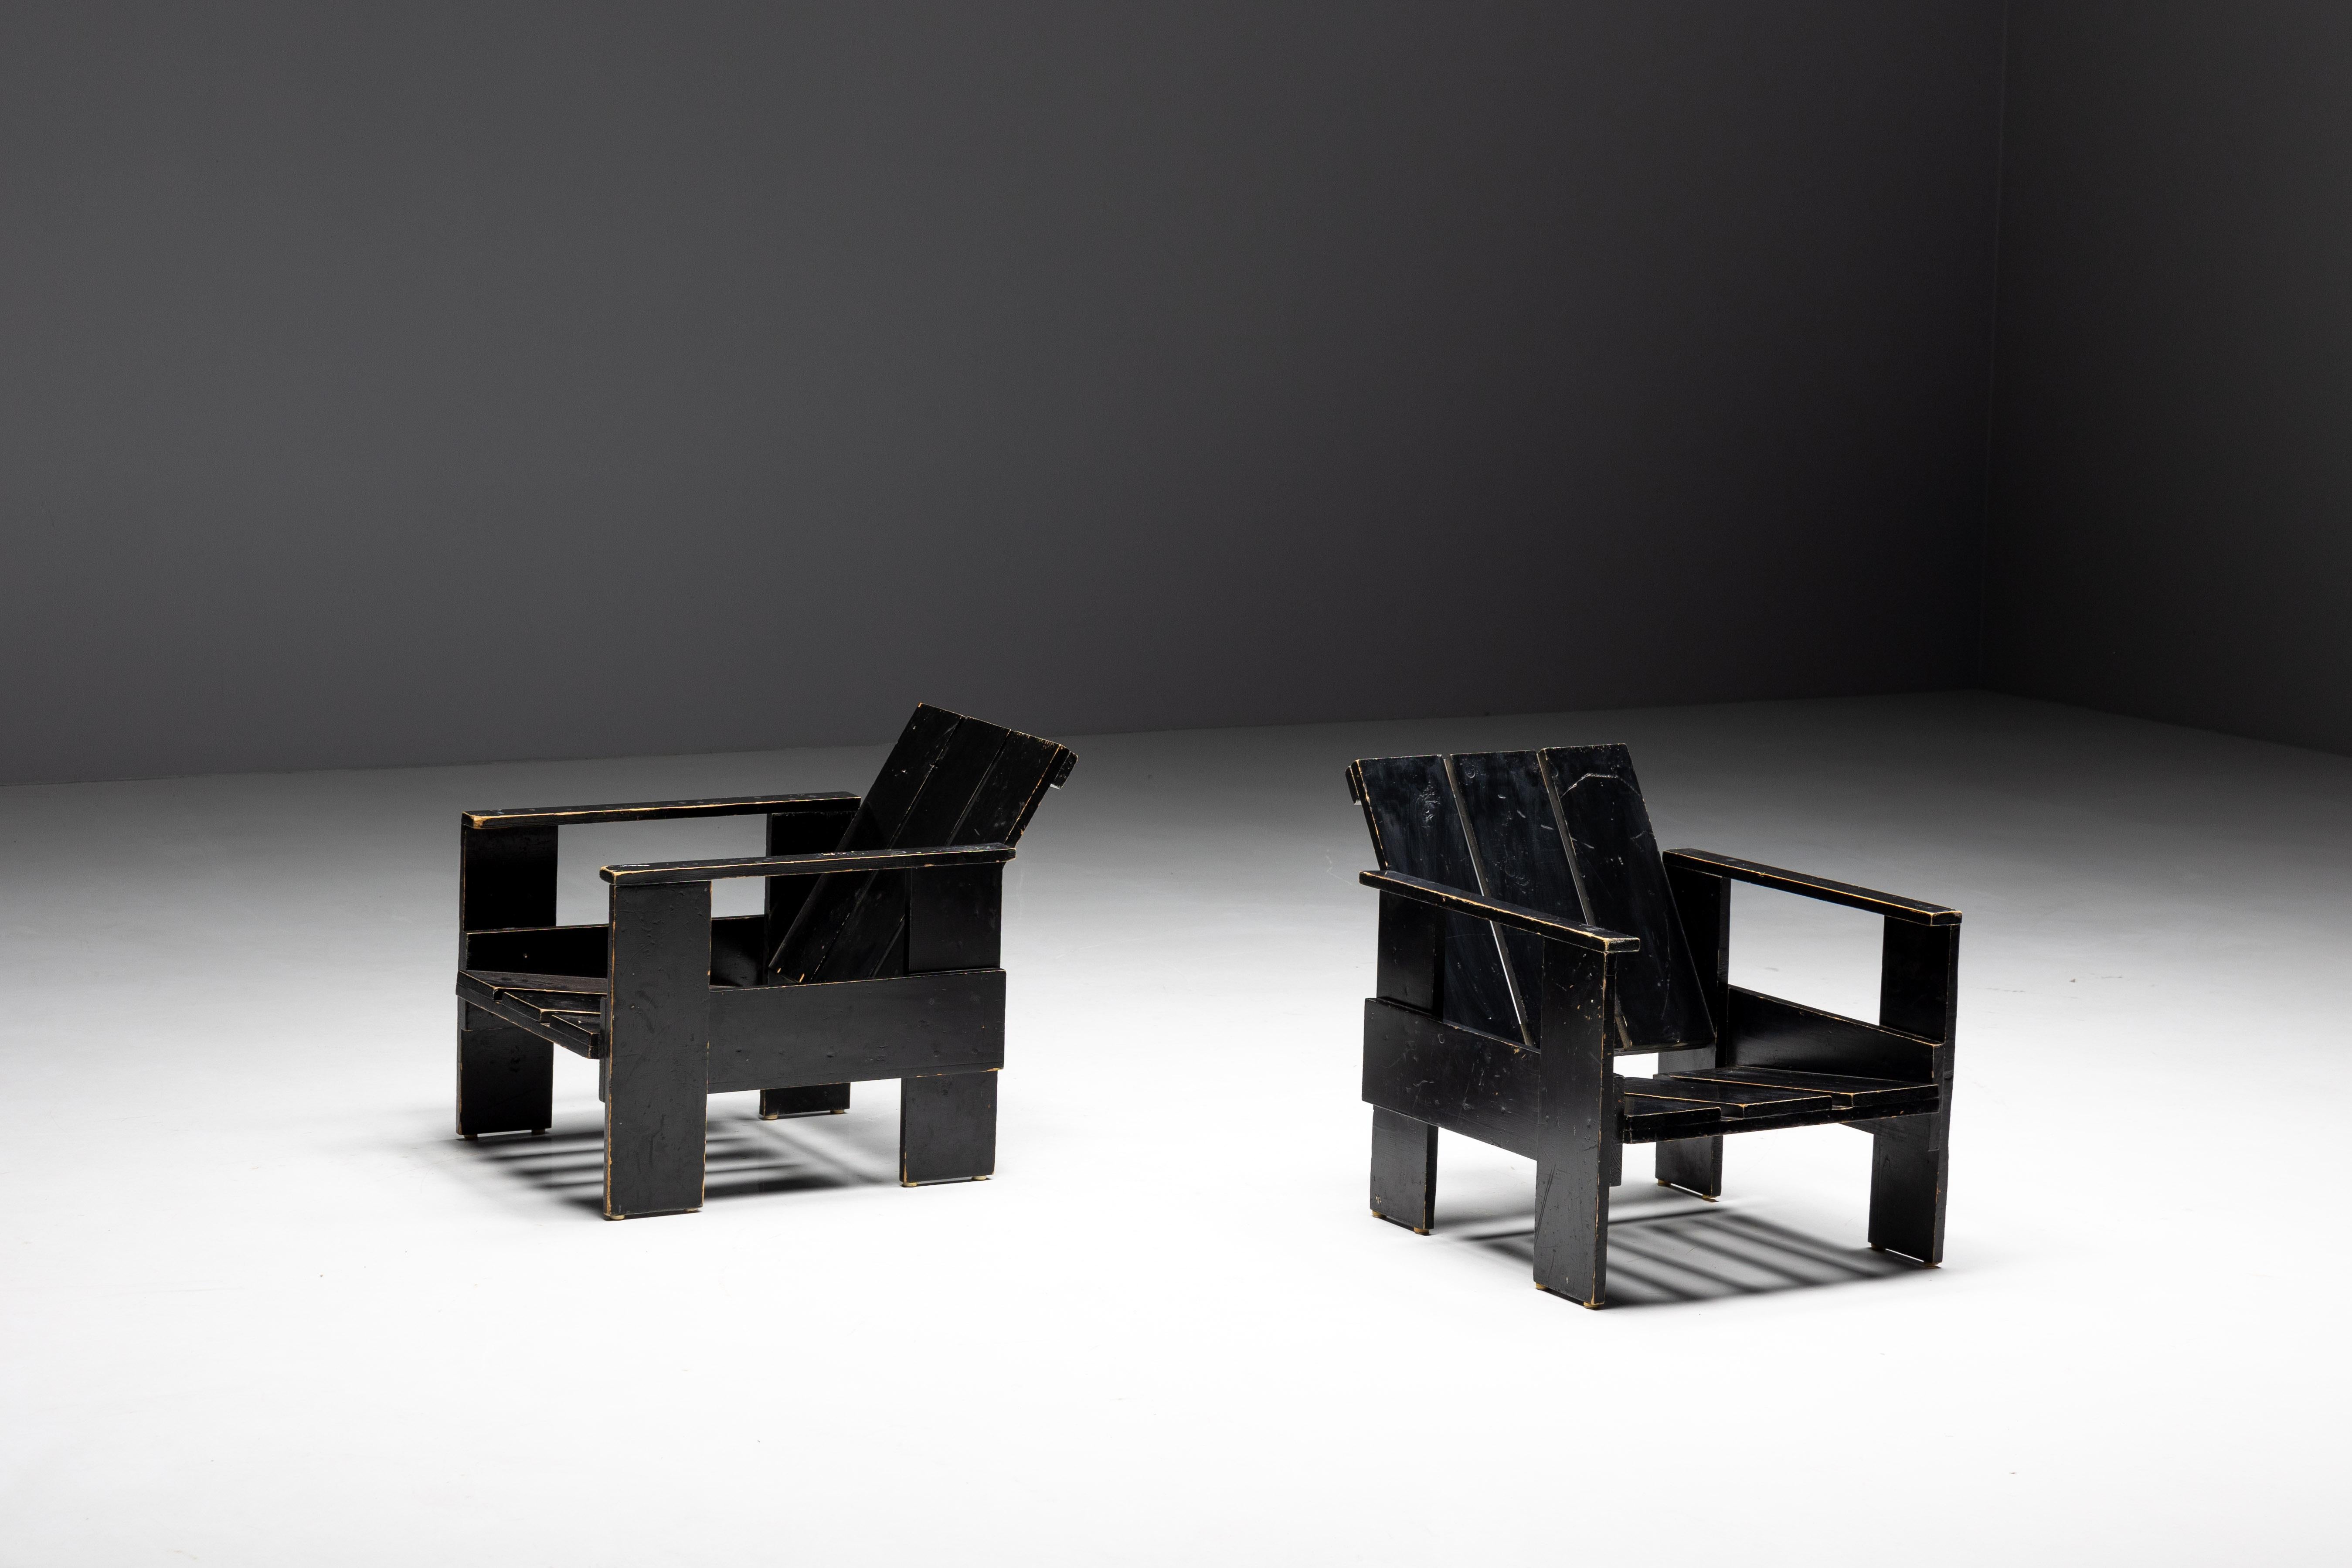 Mid-20th Century Crate Chairs by Gerrit Rietveld, Netherlands, 1940s For Sale